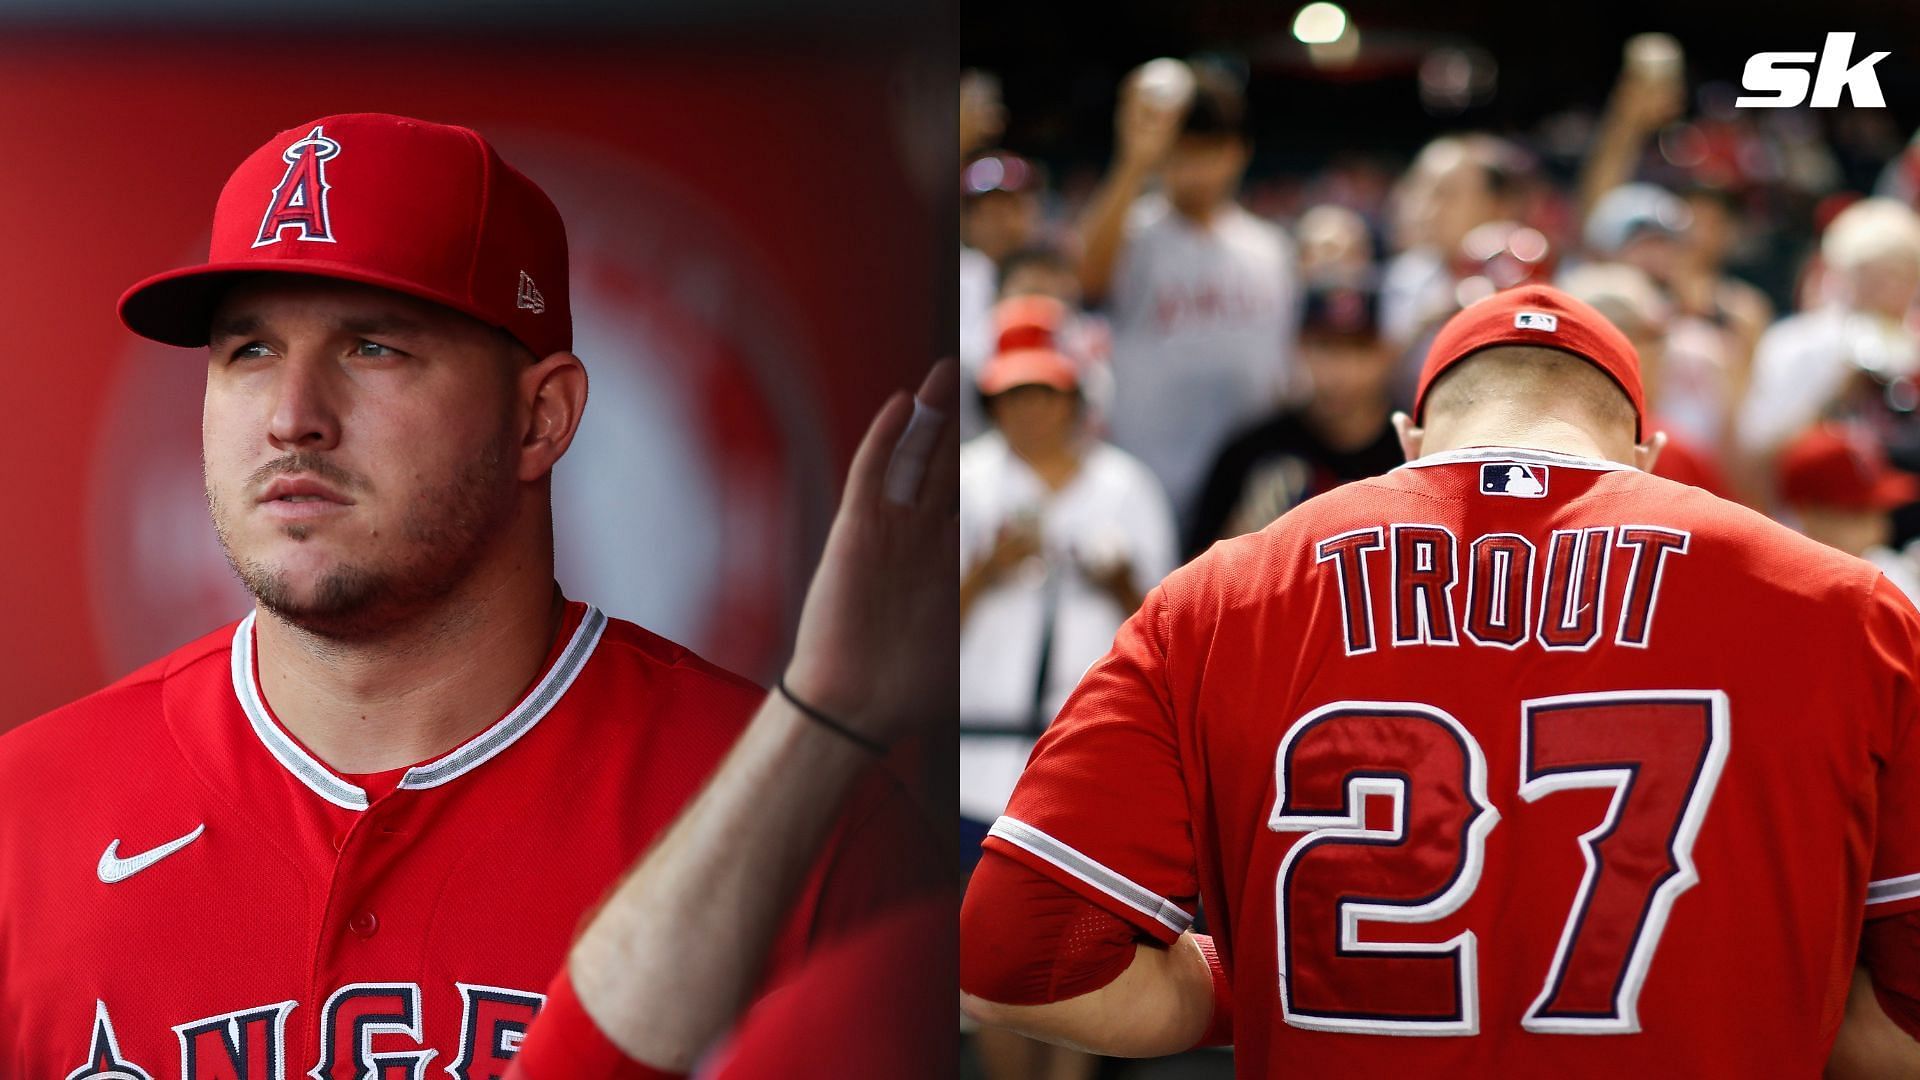 Angels star Mike Trout has cast some doubt on his future with the team after recent comments